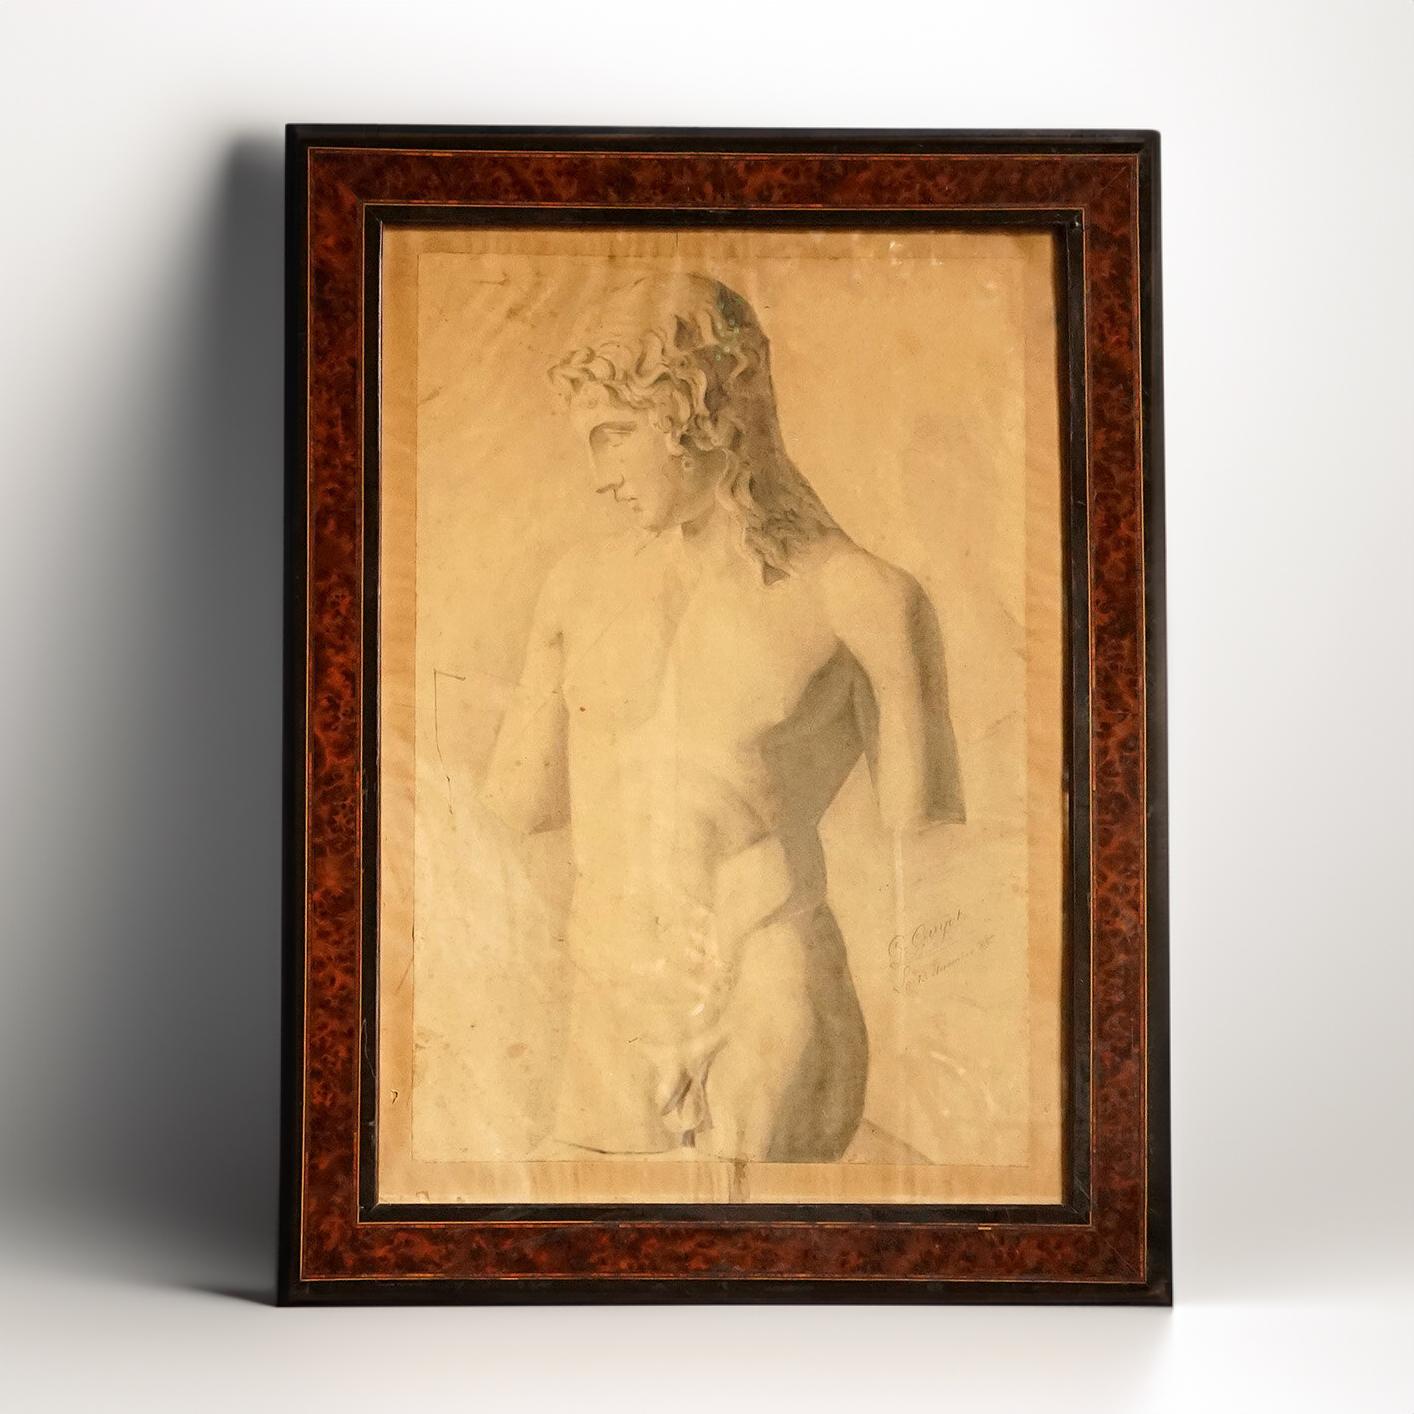 Antique Original Pencil Study of a Marble Sculpture

A sensitive study of an ancient Greek or Roman sculpture.

Signed ‘G. Guyot’ and dated 13th November 1885.

In a stunning 19th Century burl walnut and ebonised glazed frame.

The drawing itself is